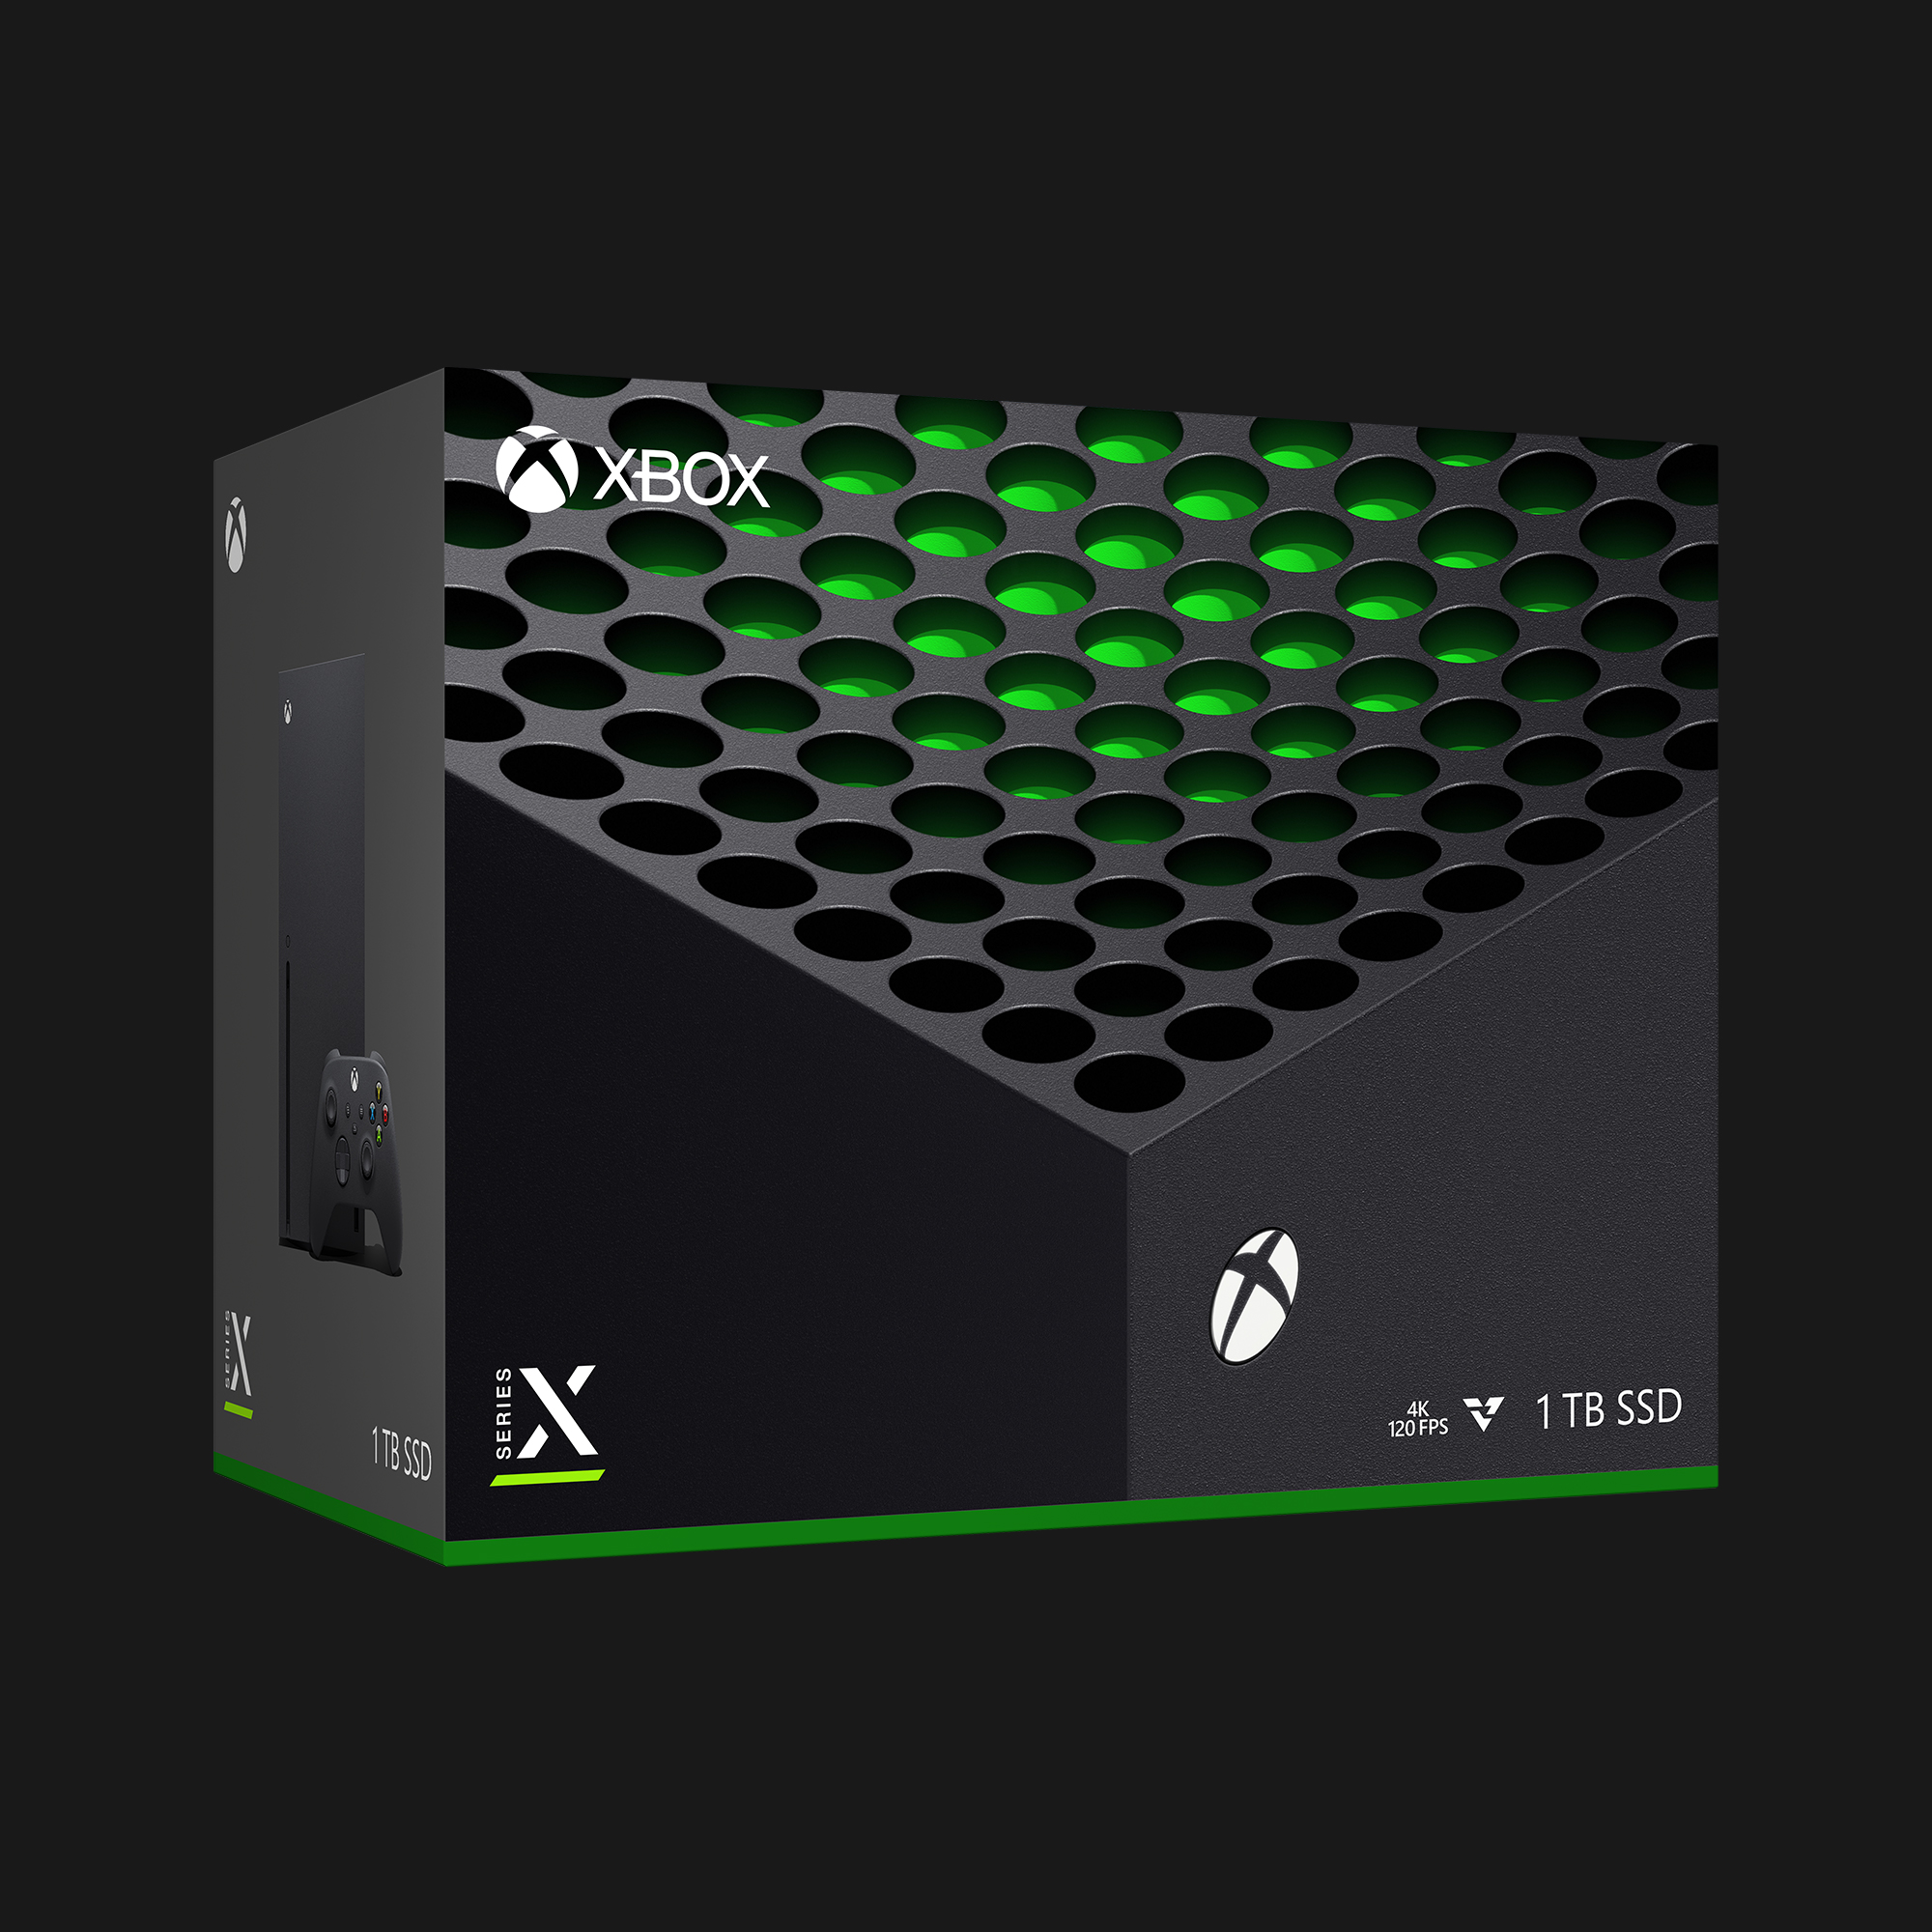 Xbox Series X Video Game Console, Black - image 7 of 7